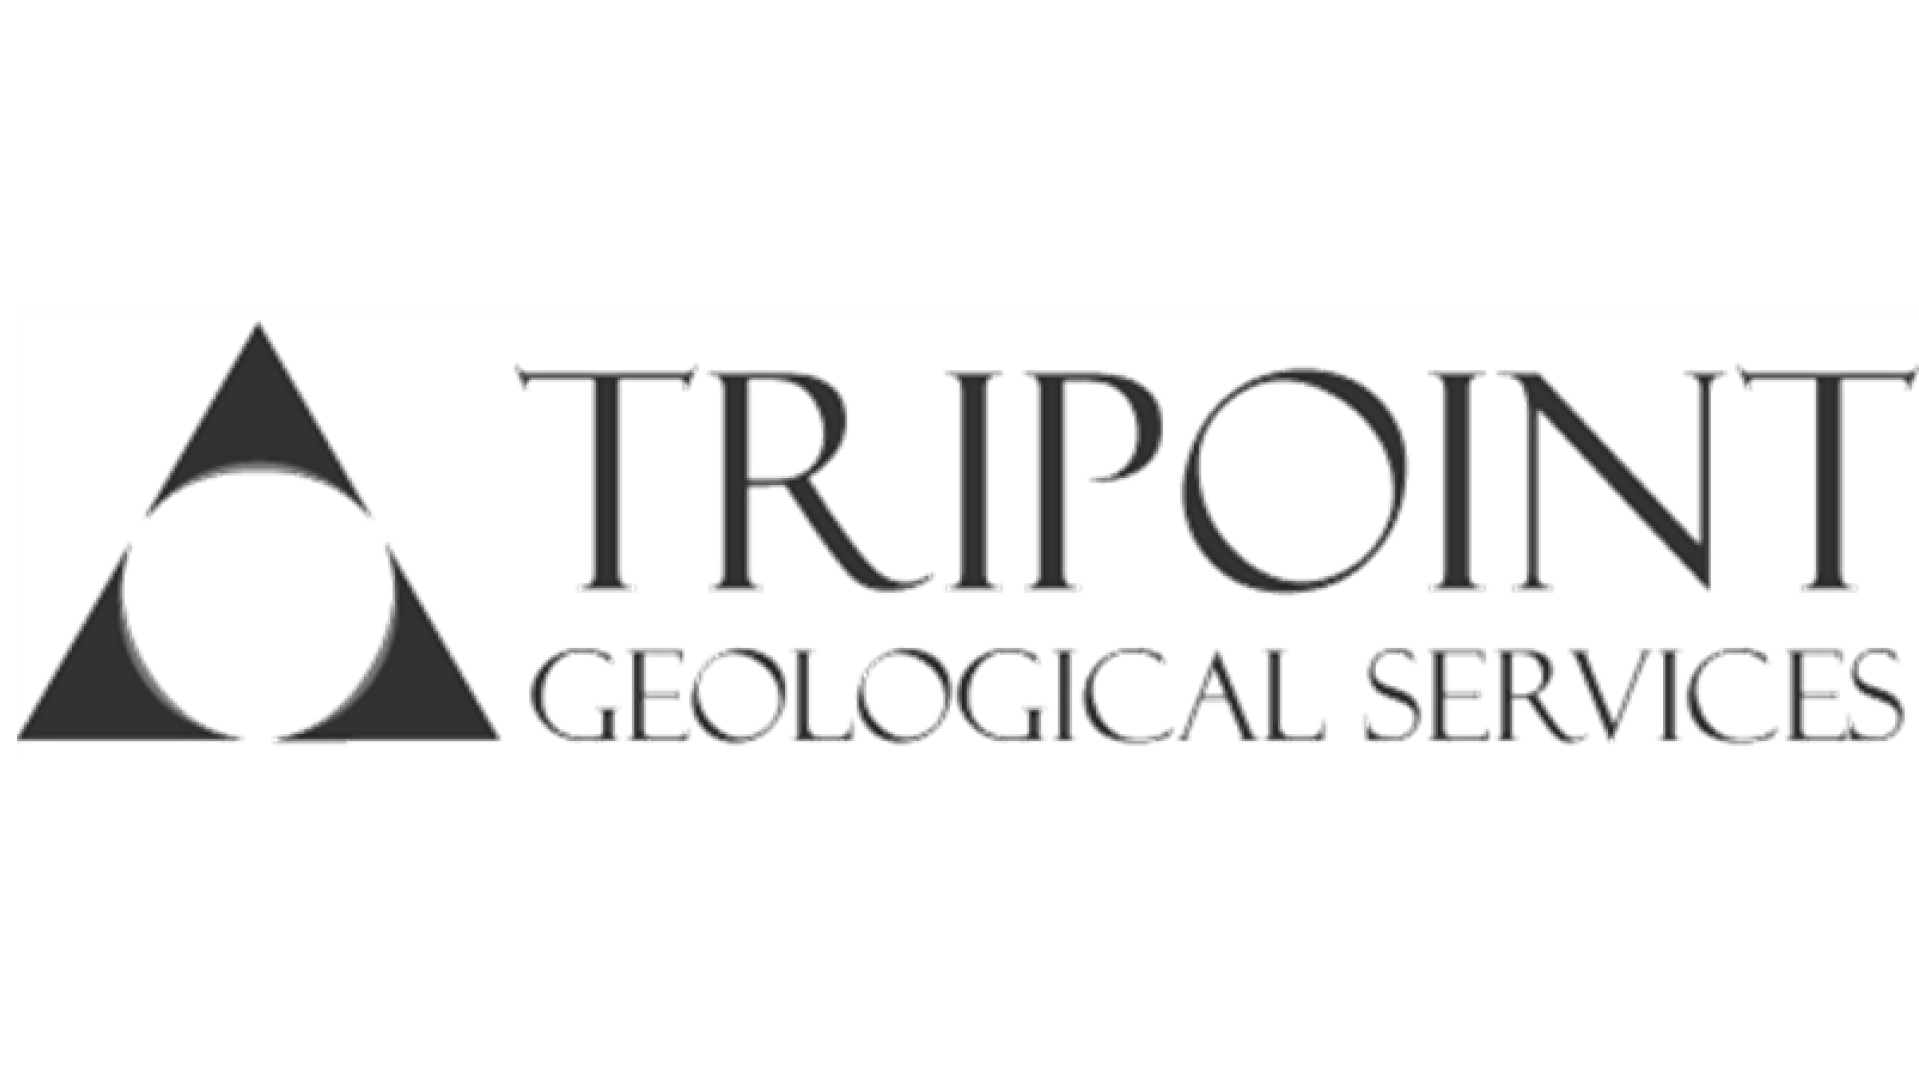 Tripoint Geological Services Ltd.